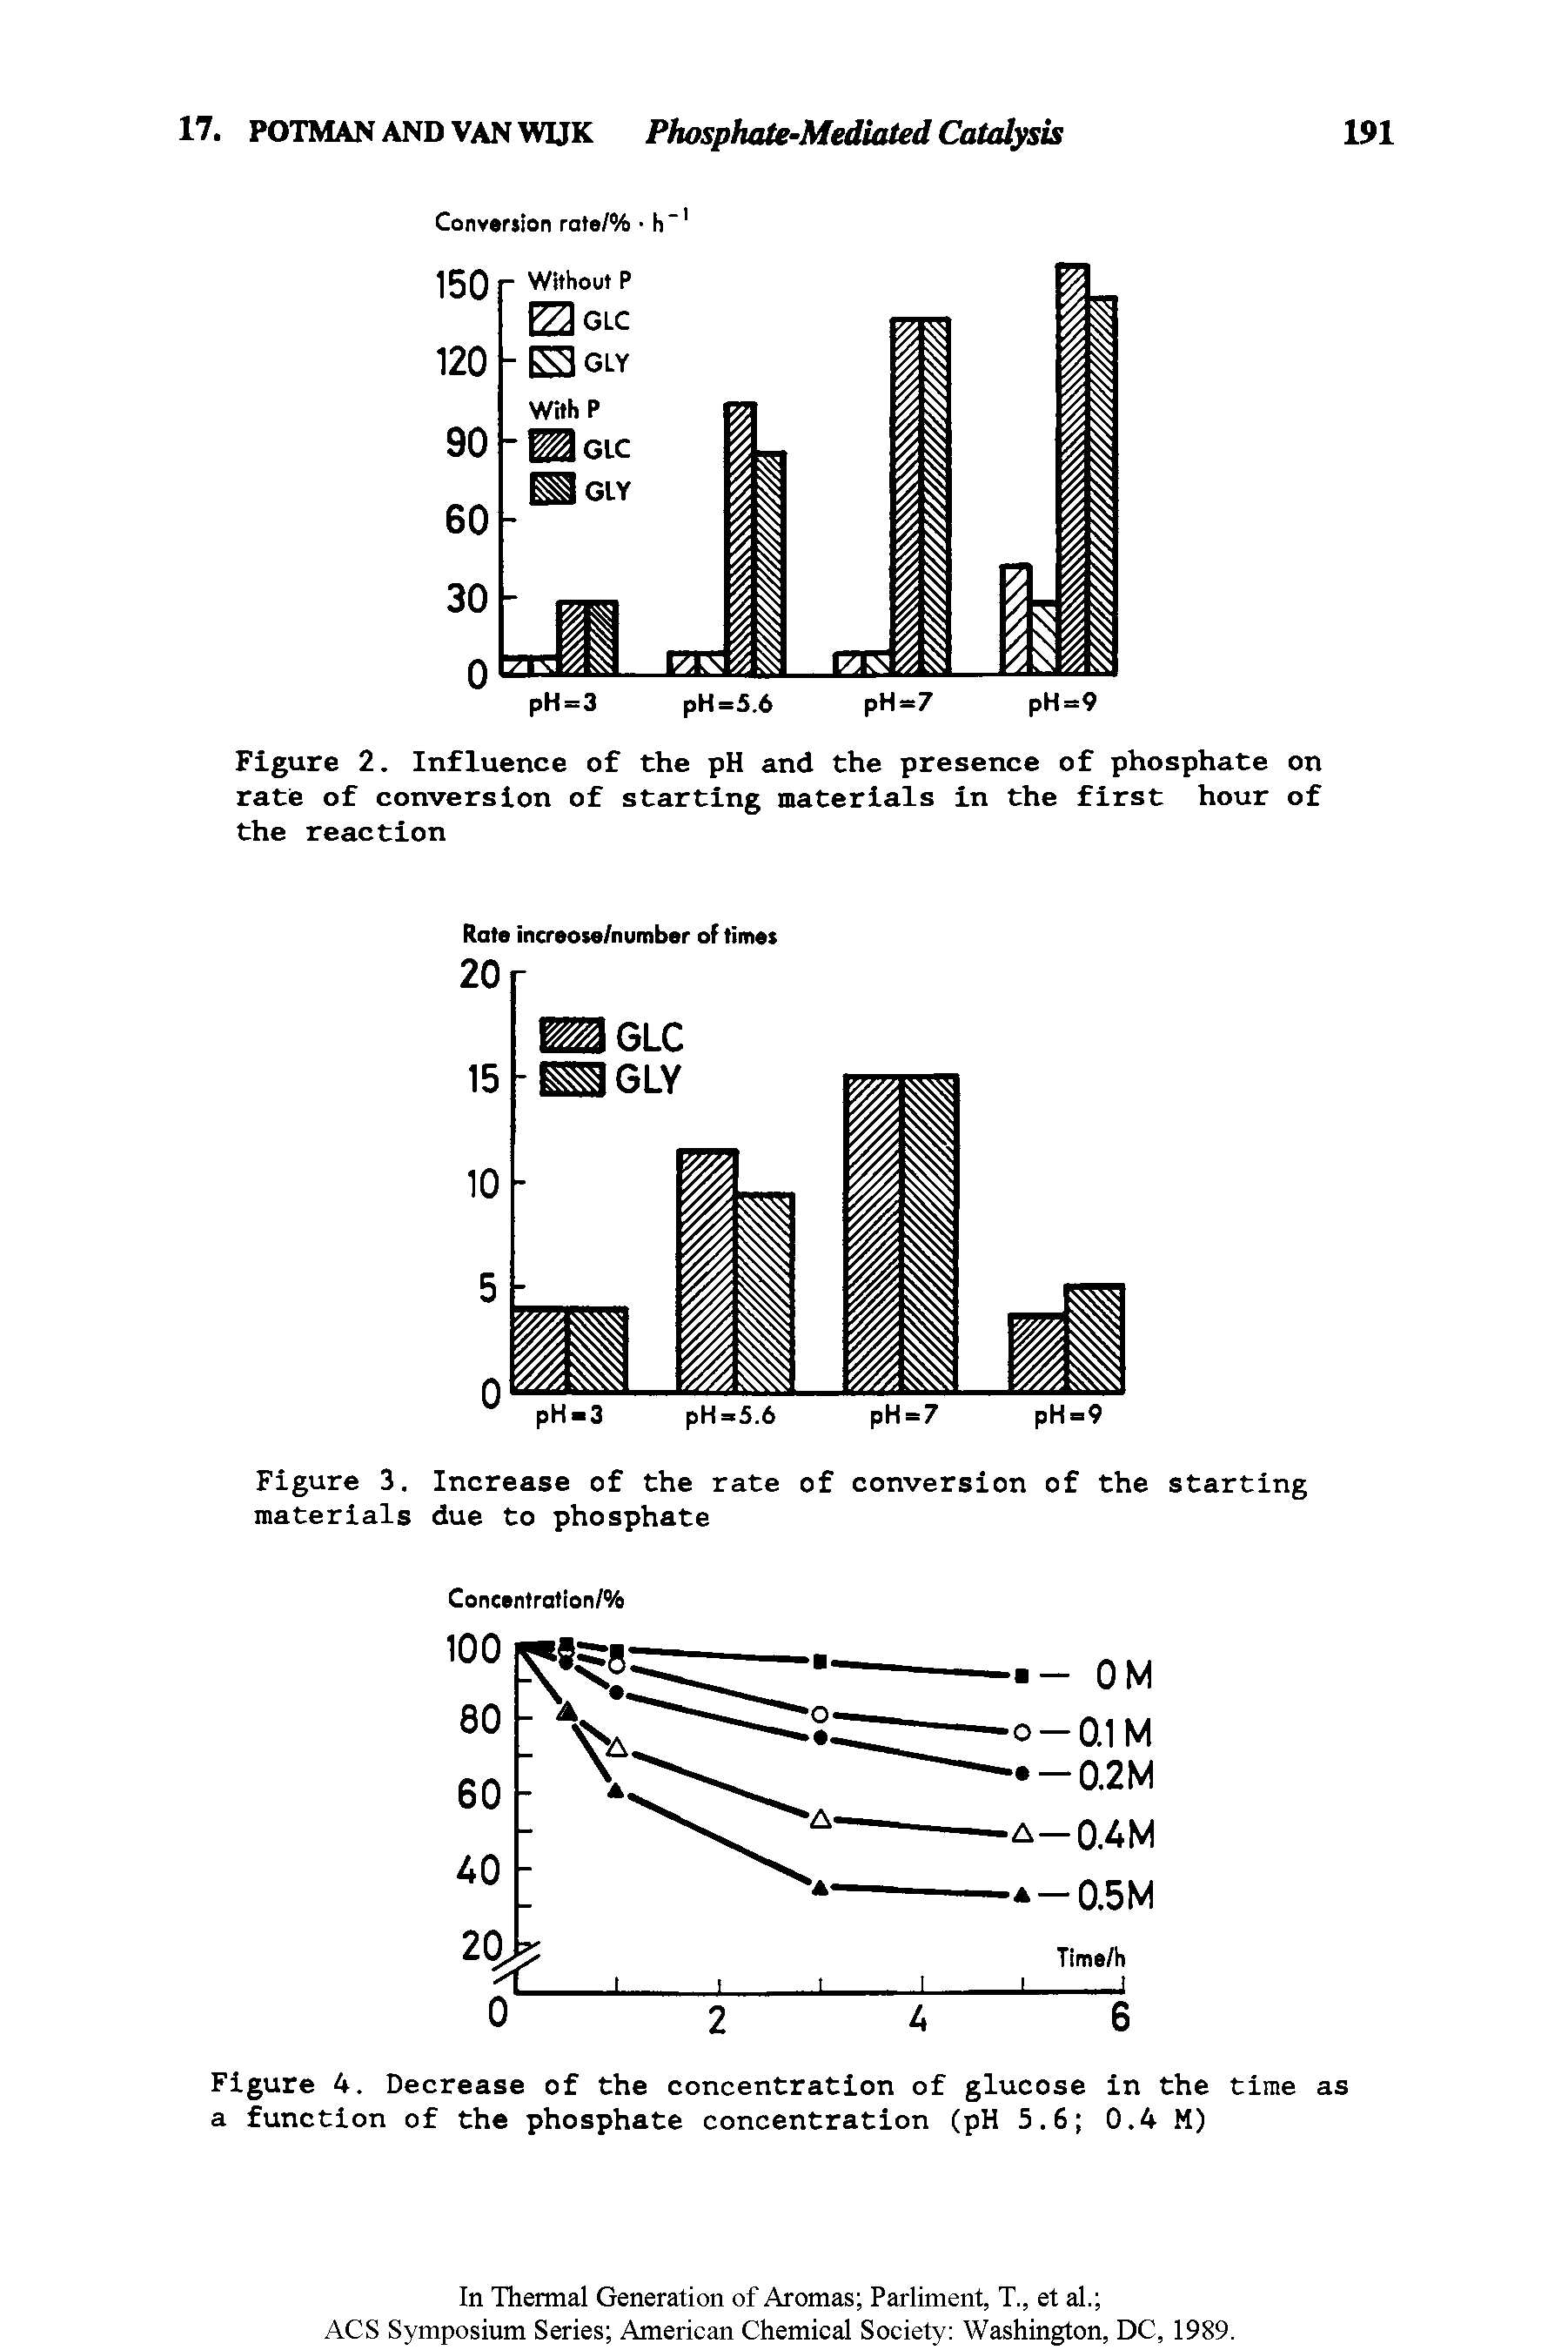 Figure 2. Influence of the pH and the presence of phosphate on rate of conversion of starting materials in the first hour of the reaction...